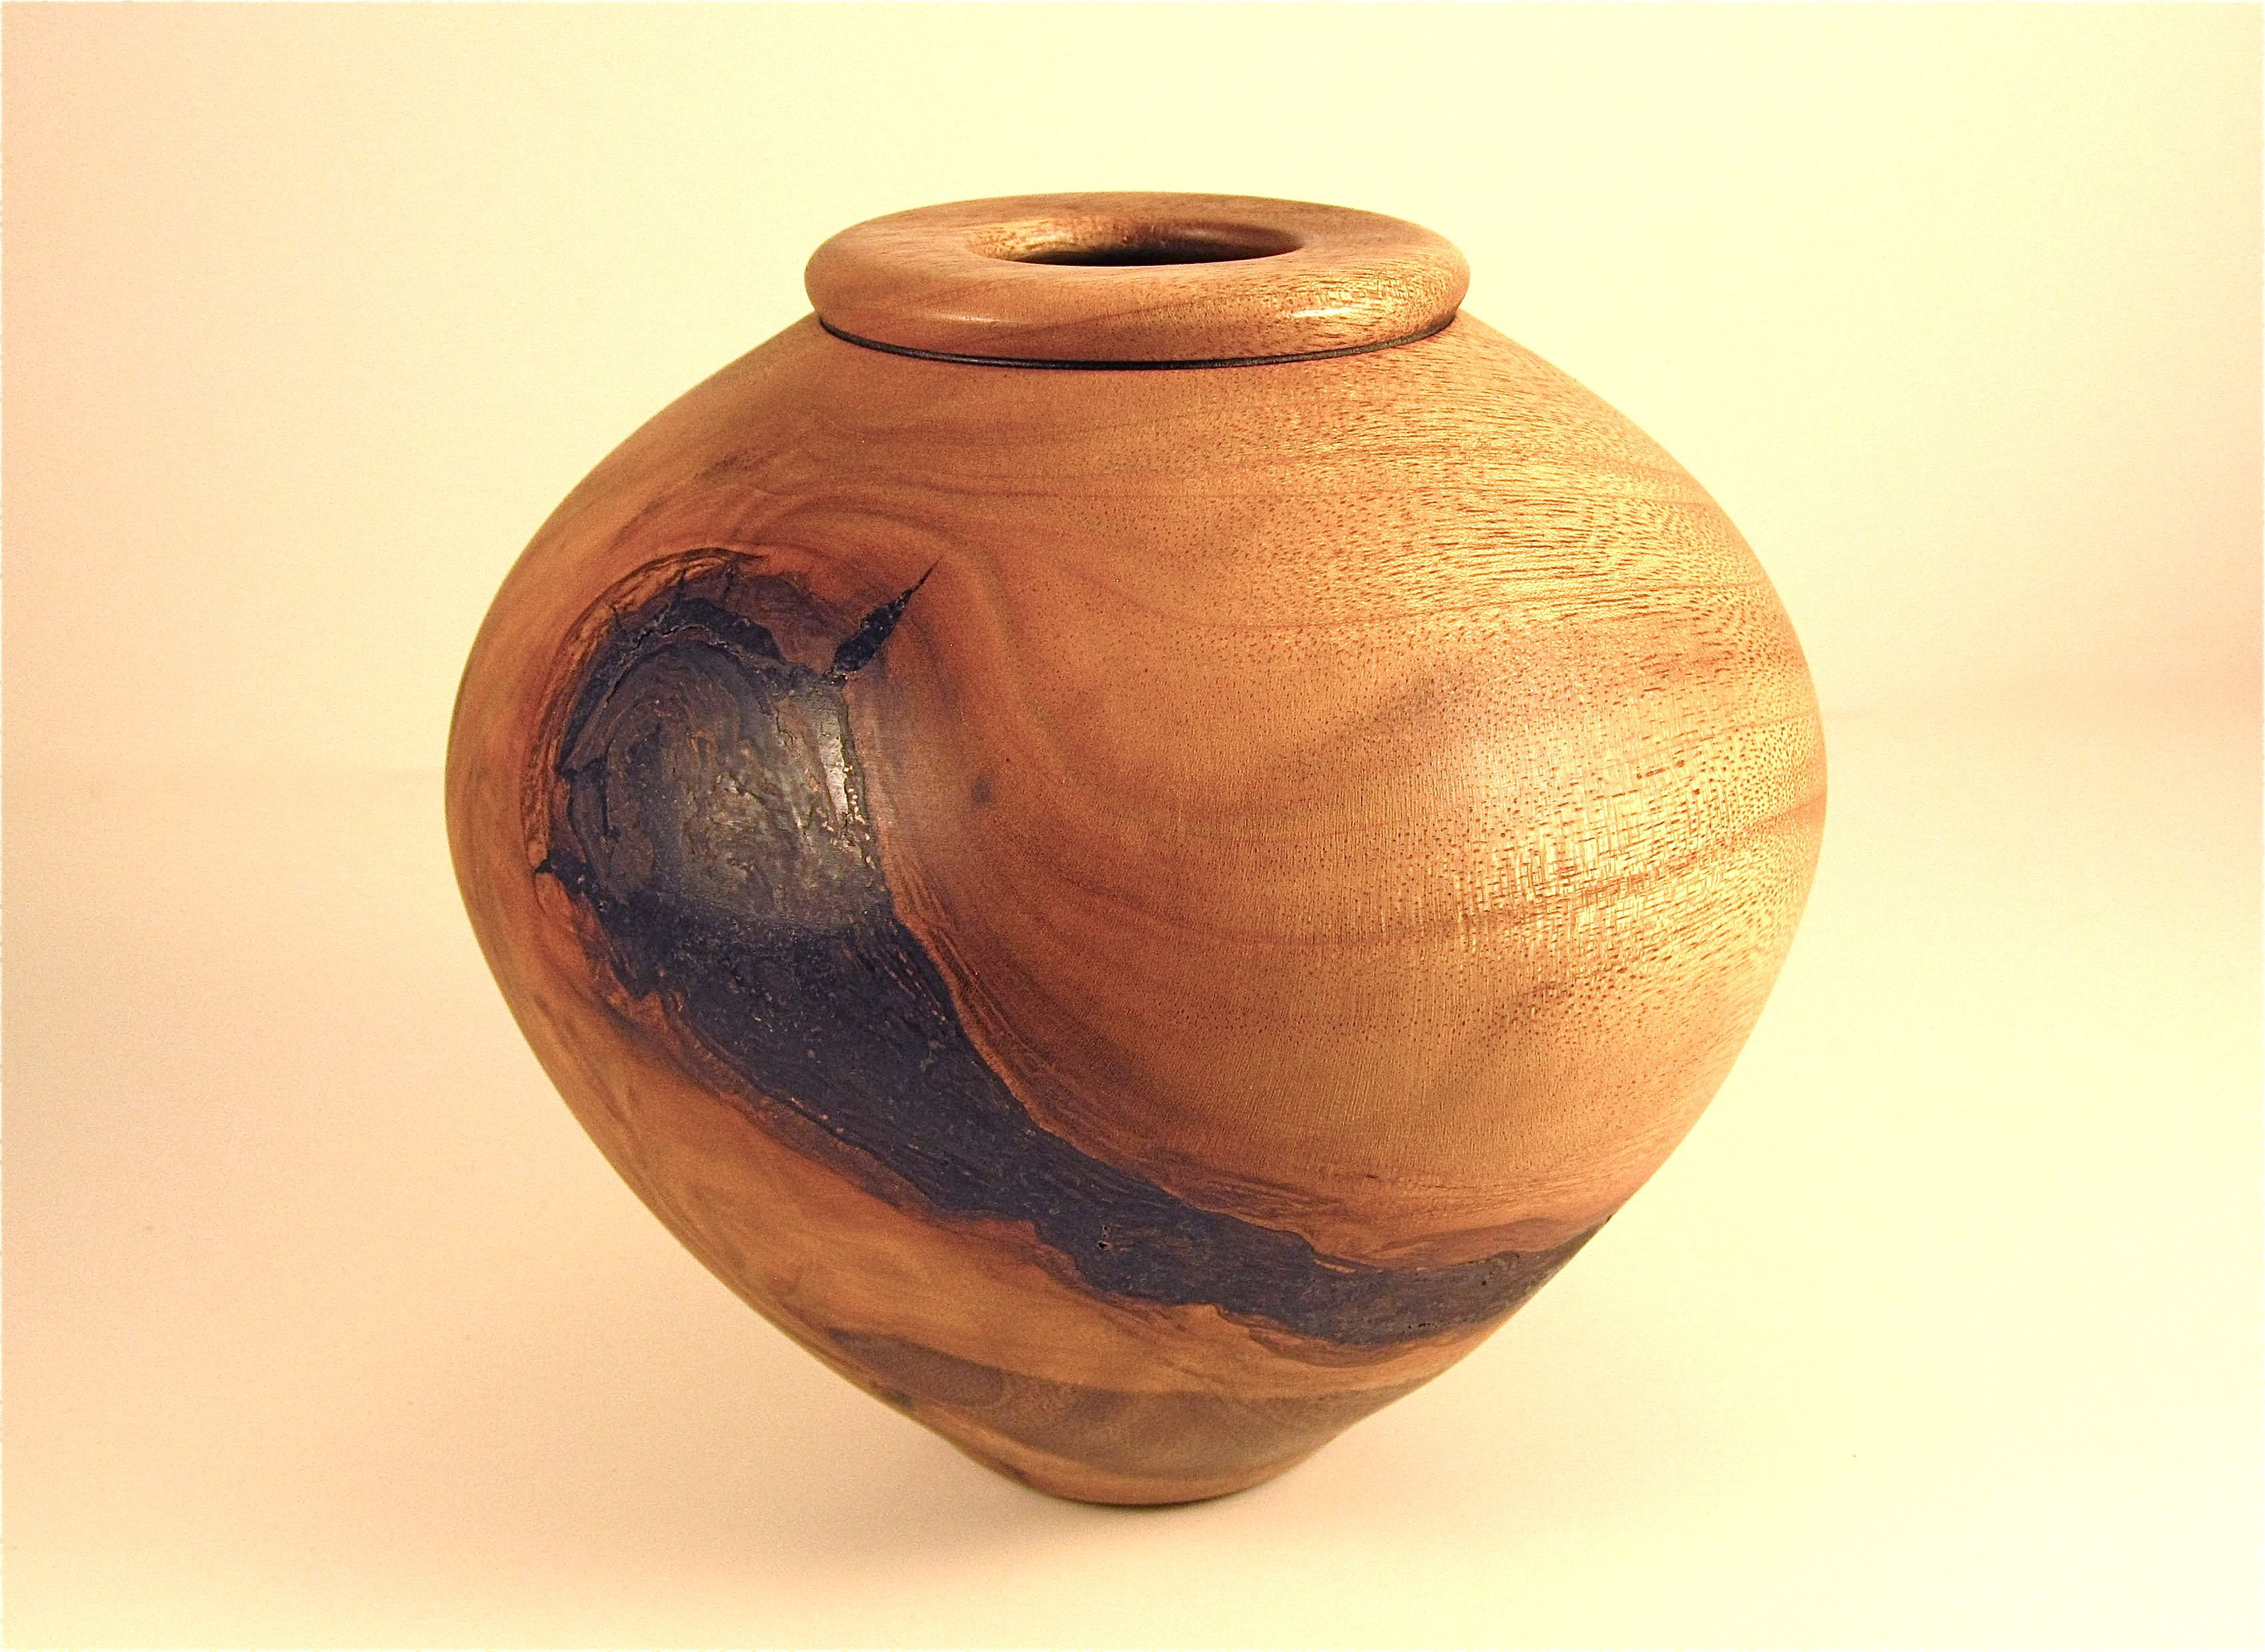 24 attractive Wood Turned Vase 2024 free download wood turned vase of cherry wood hollow form used coffee grinds to fill the large hole for cherry wood hollow form used coffee grinds to fill the large hole and have it